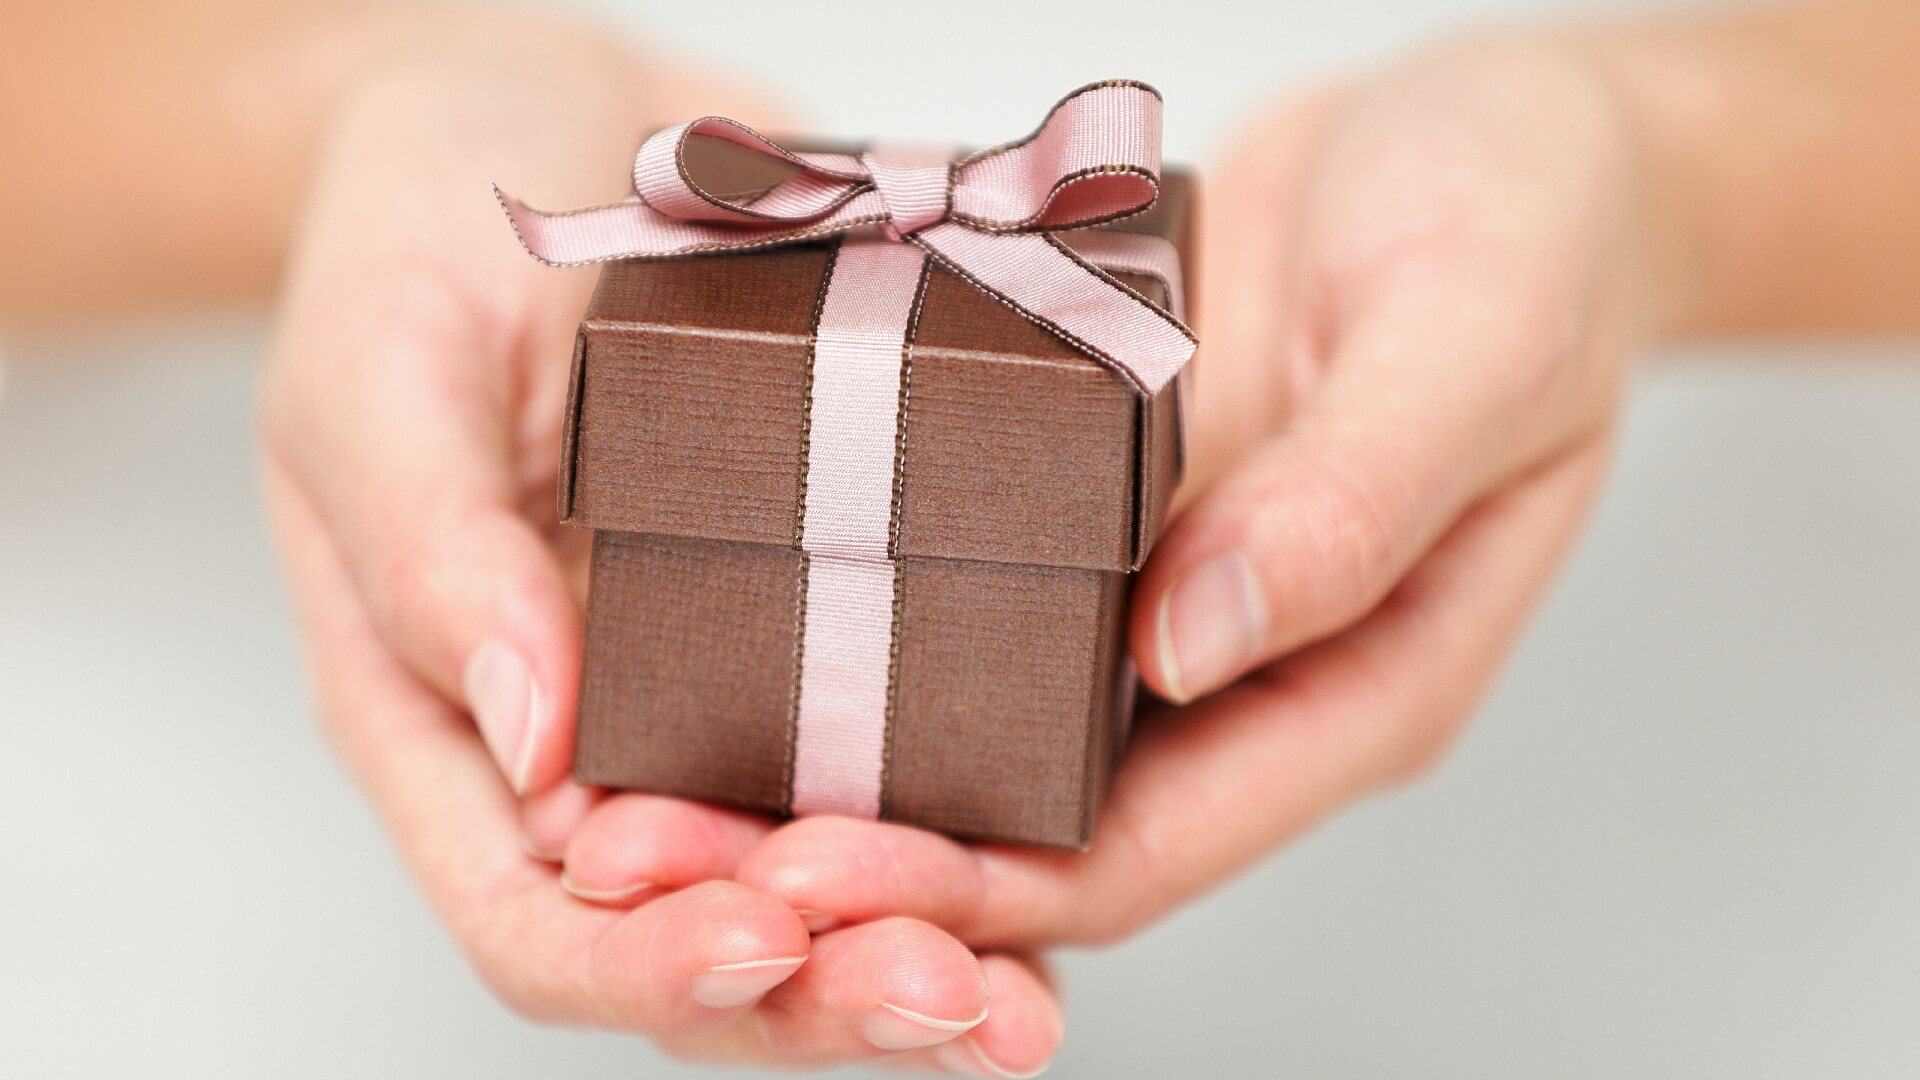 a small gift box sits in someone’s hands